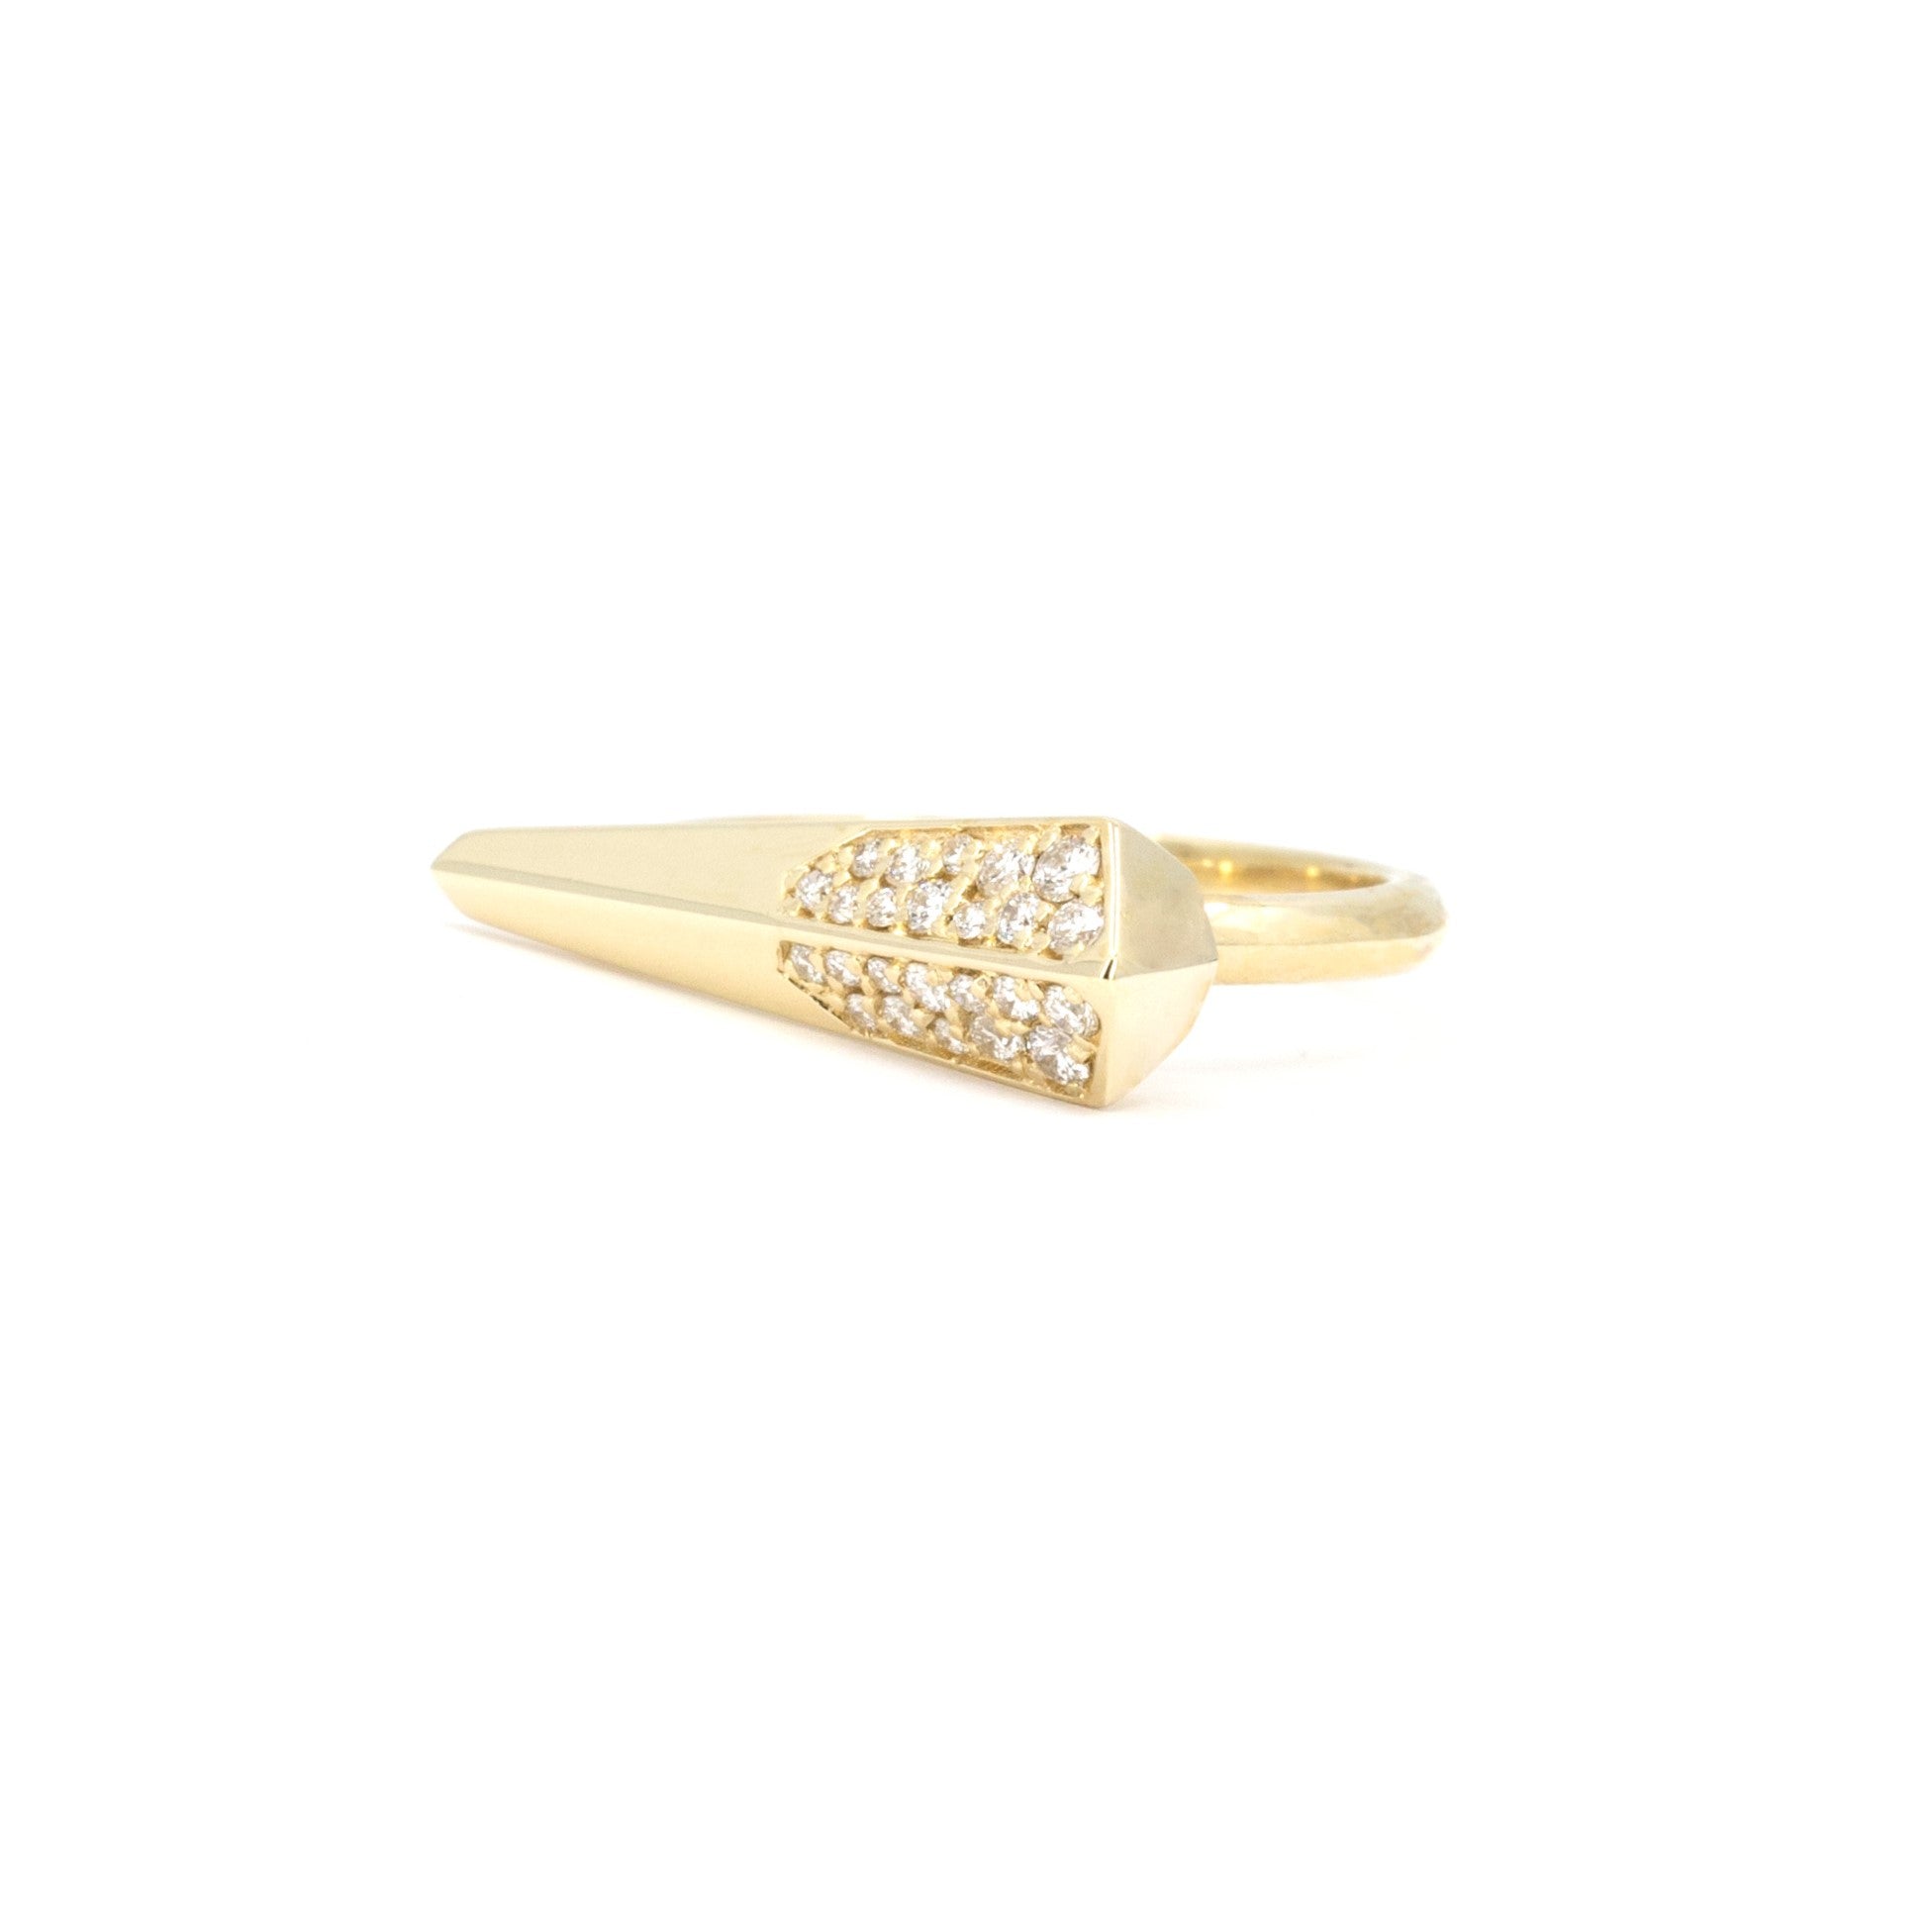 SPINE | Edgy Yellow Gold Diamond Ring